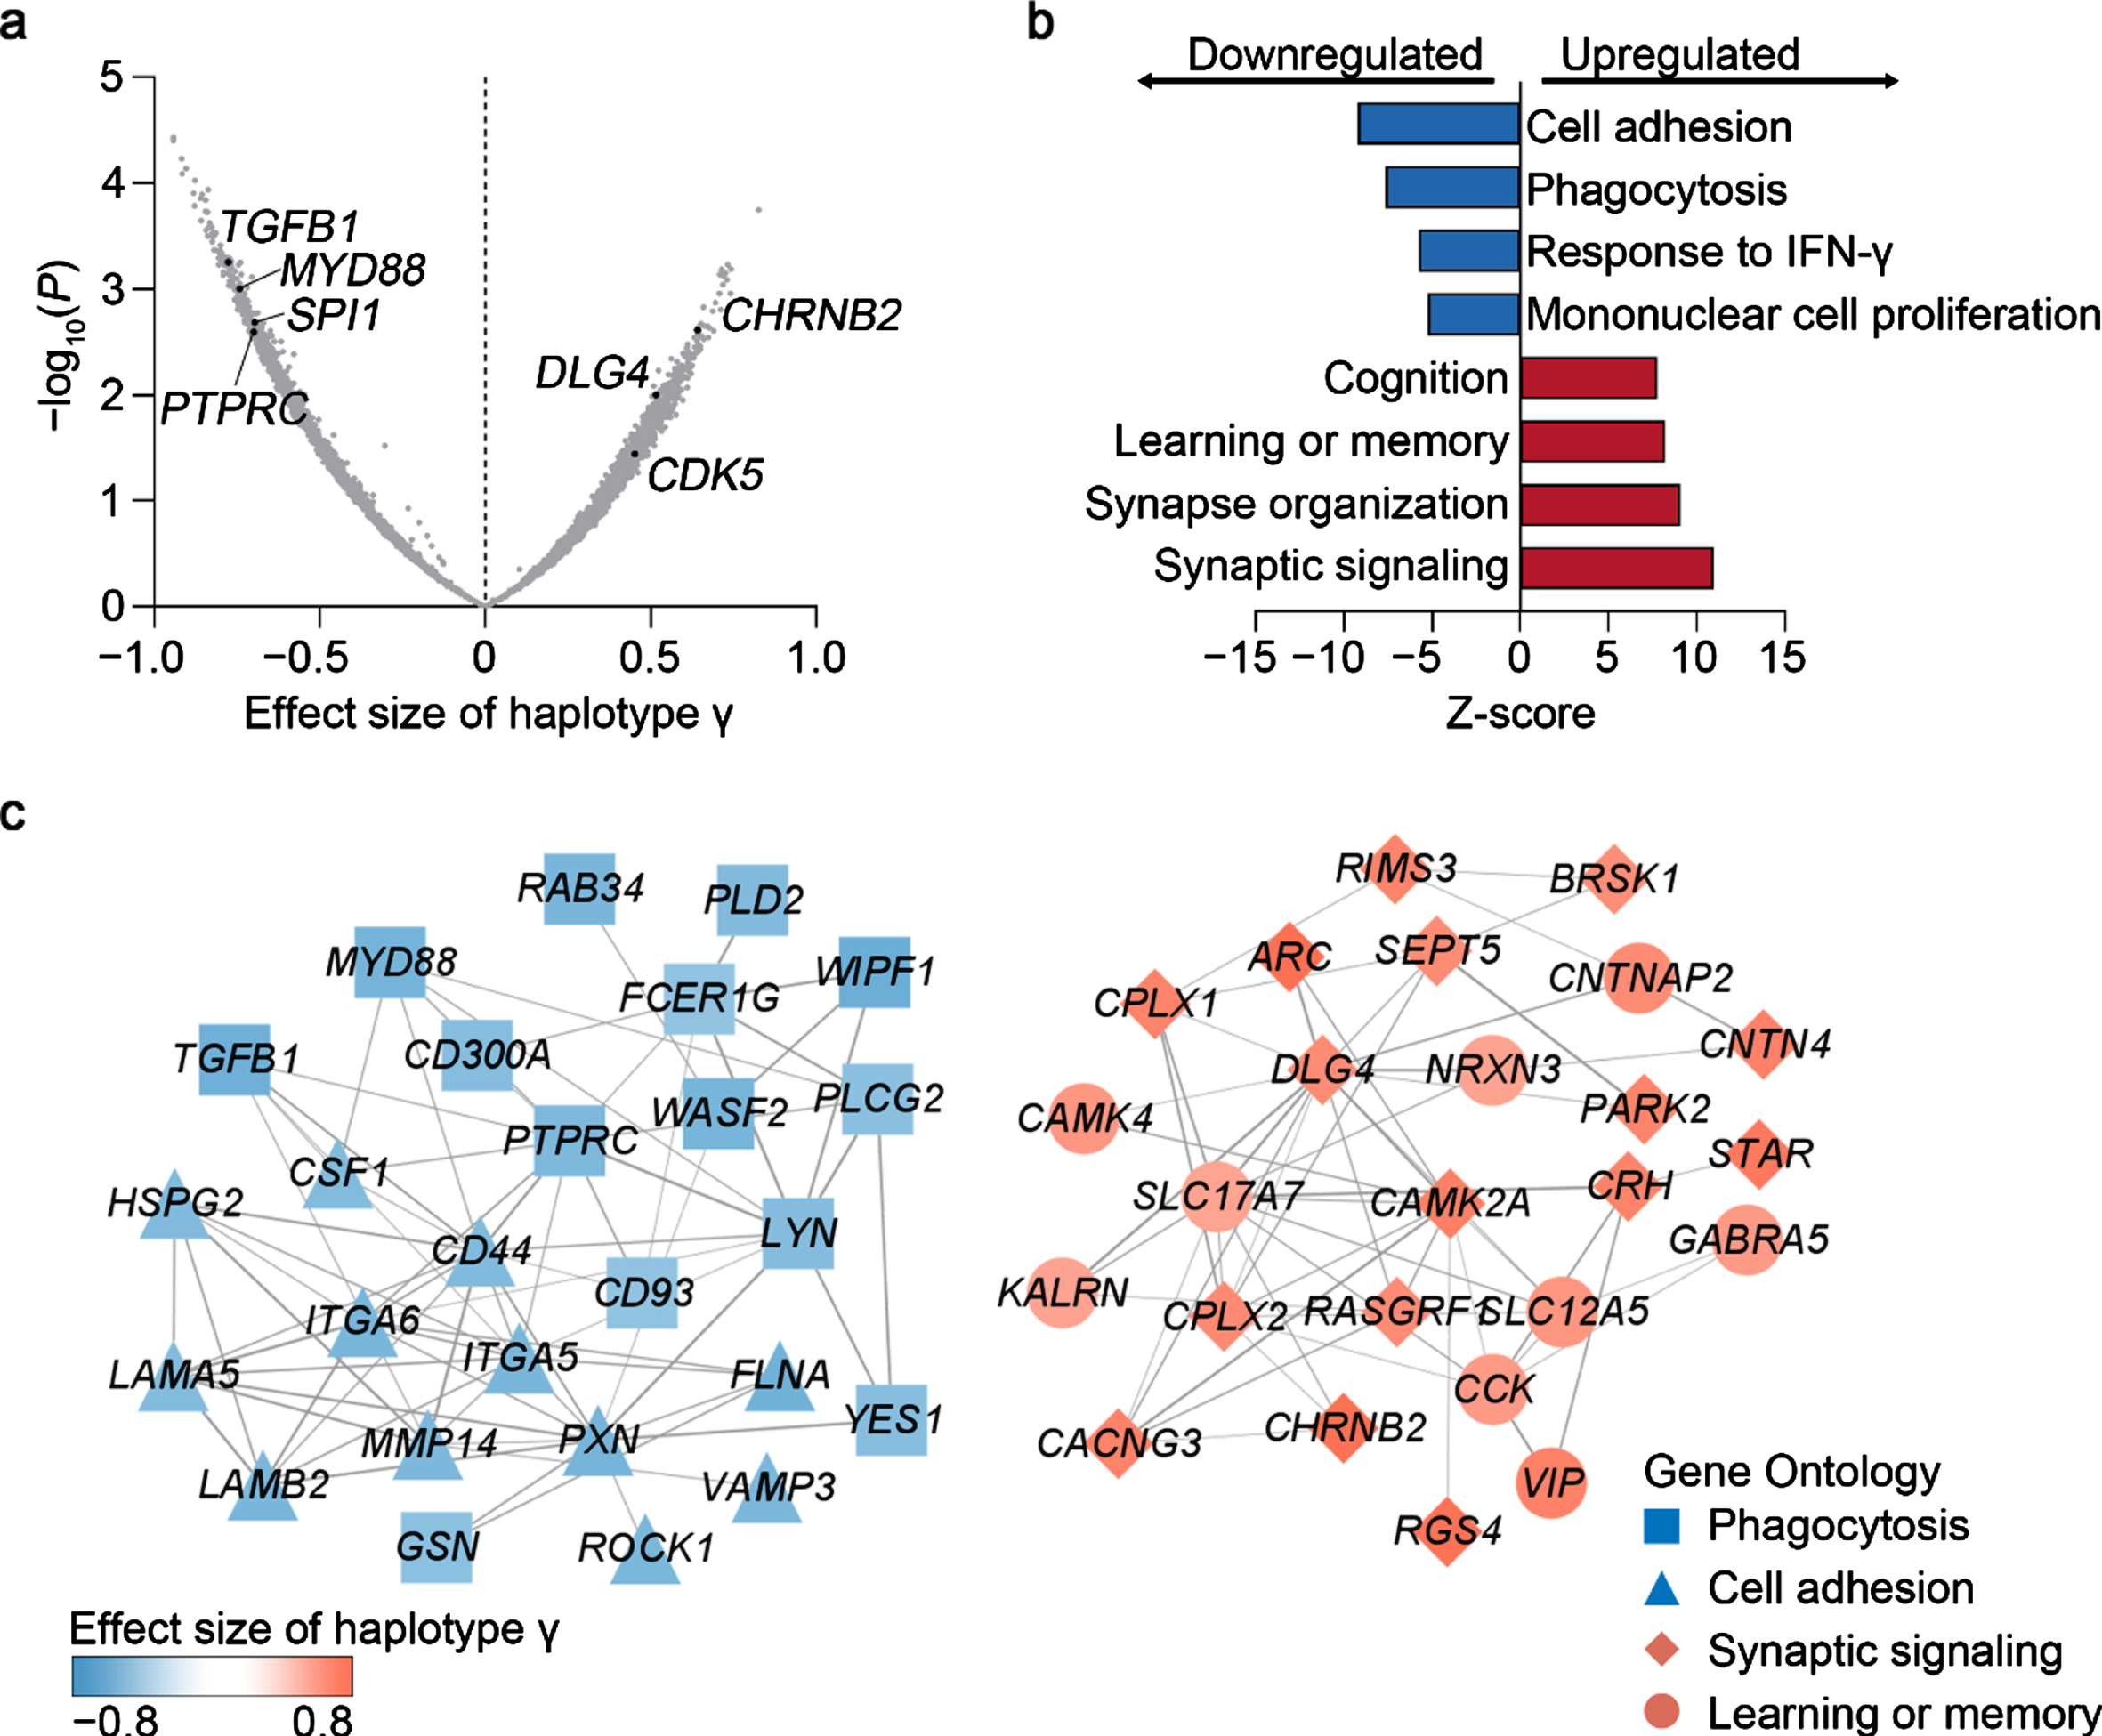 Associations between haplotype γ and transcriptomic changes in the cerebral cortex in APOE33 donors. a) Volcano plot showing the associations between haplotype γ and cortical gene expression. b) Gene Ontology analysis of genes modulated by haplotype γ in the cerebral cortex. c) Protein–protein interaction network of genes involved in immune and neuronal functions. Nodes and edges denote genes and their interactions. Node shapes represent the ontology of corresponding genes. Node colors denote the effect size of haplotype γ on transcript level.